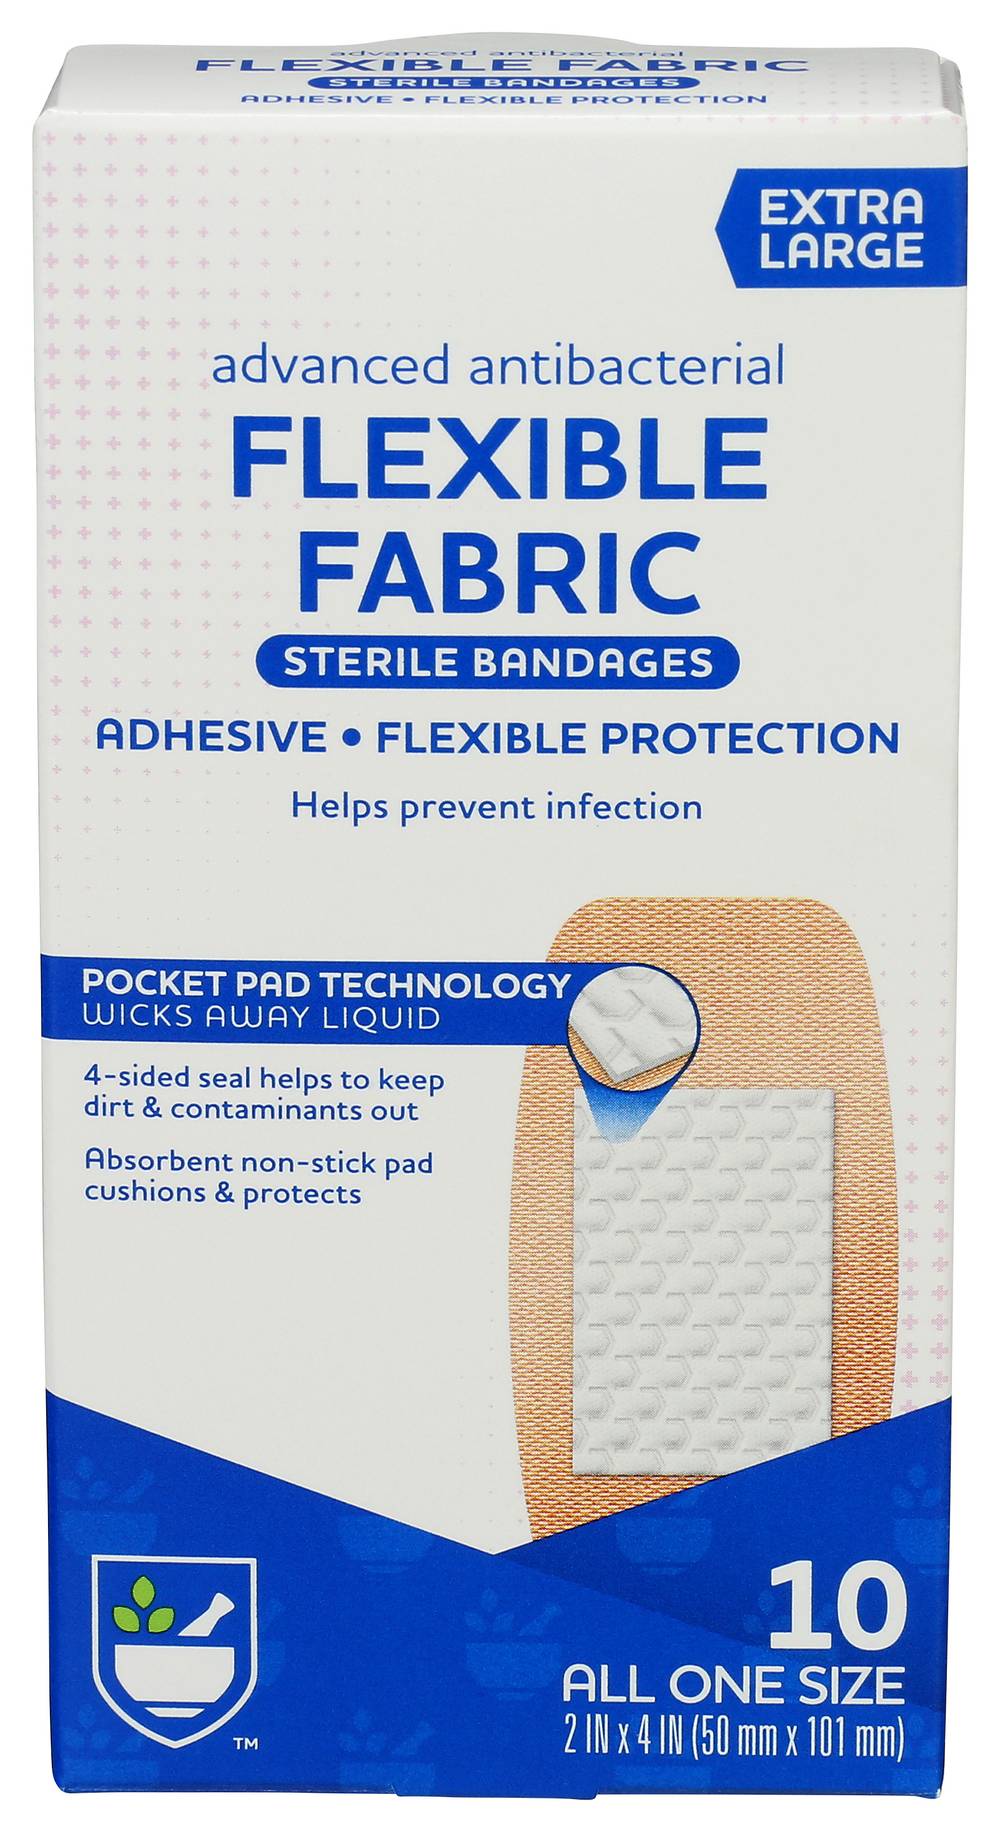 Rite Aid Advanced Antibacterial Fabric Bandages Extra Large (10 ct)